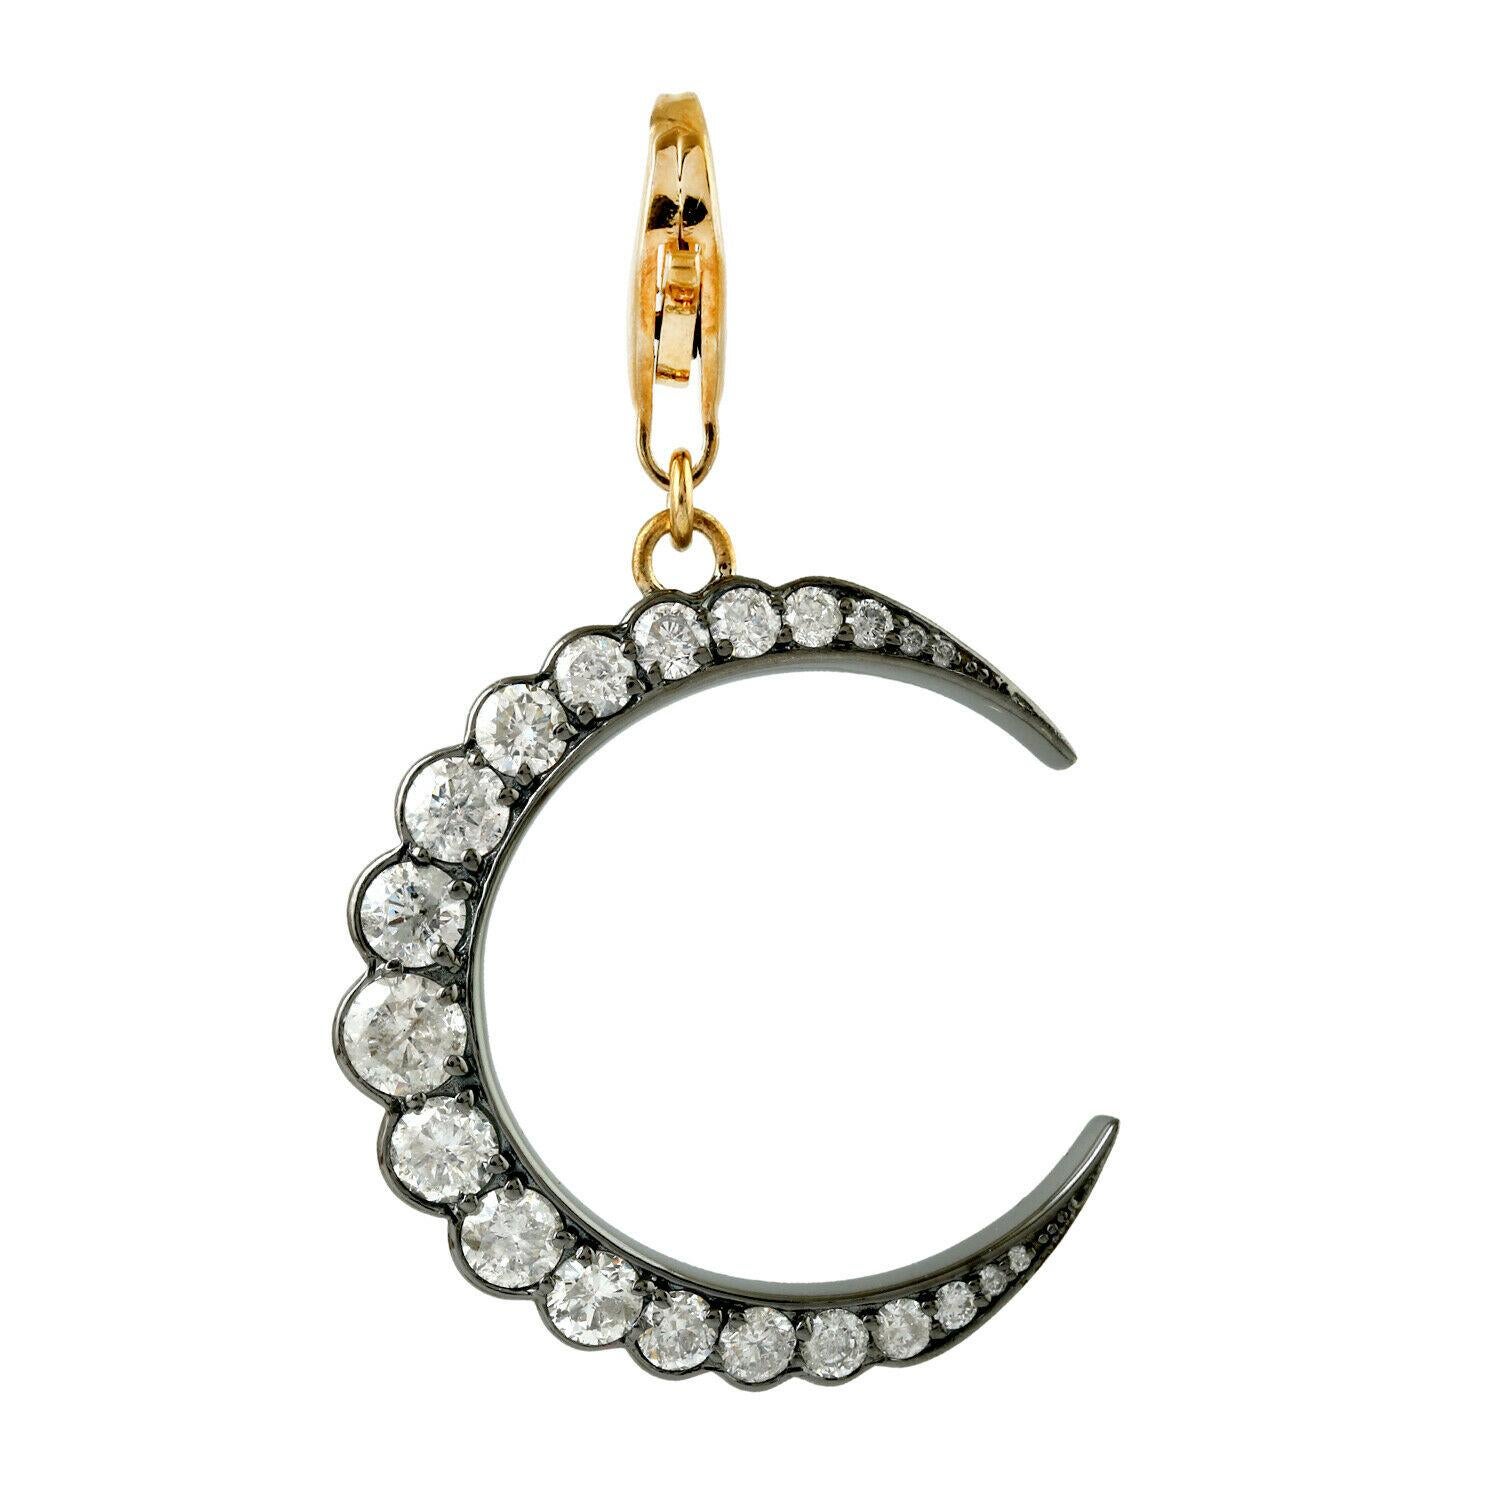 The crescent moon is hand set in 14K gold and 1.75 carat diamonds.

FOLLOW  MEGHNA JEWELS storefront to view the latest collection & exclusive pieces.  Meghna Jewels is proudly rated as a Top Seller on 1stdibs with 5 star customer reviews. All items